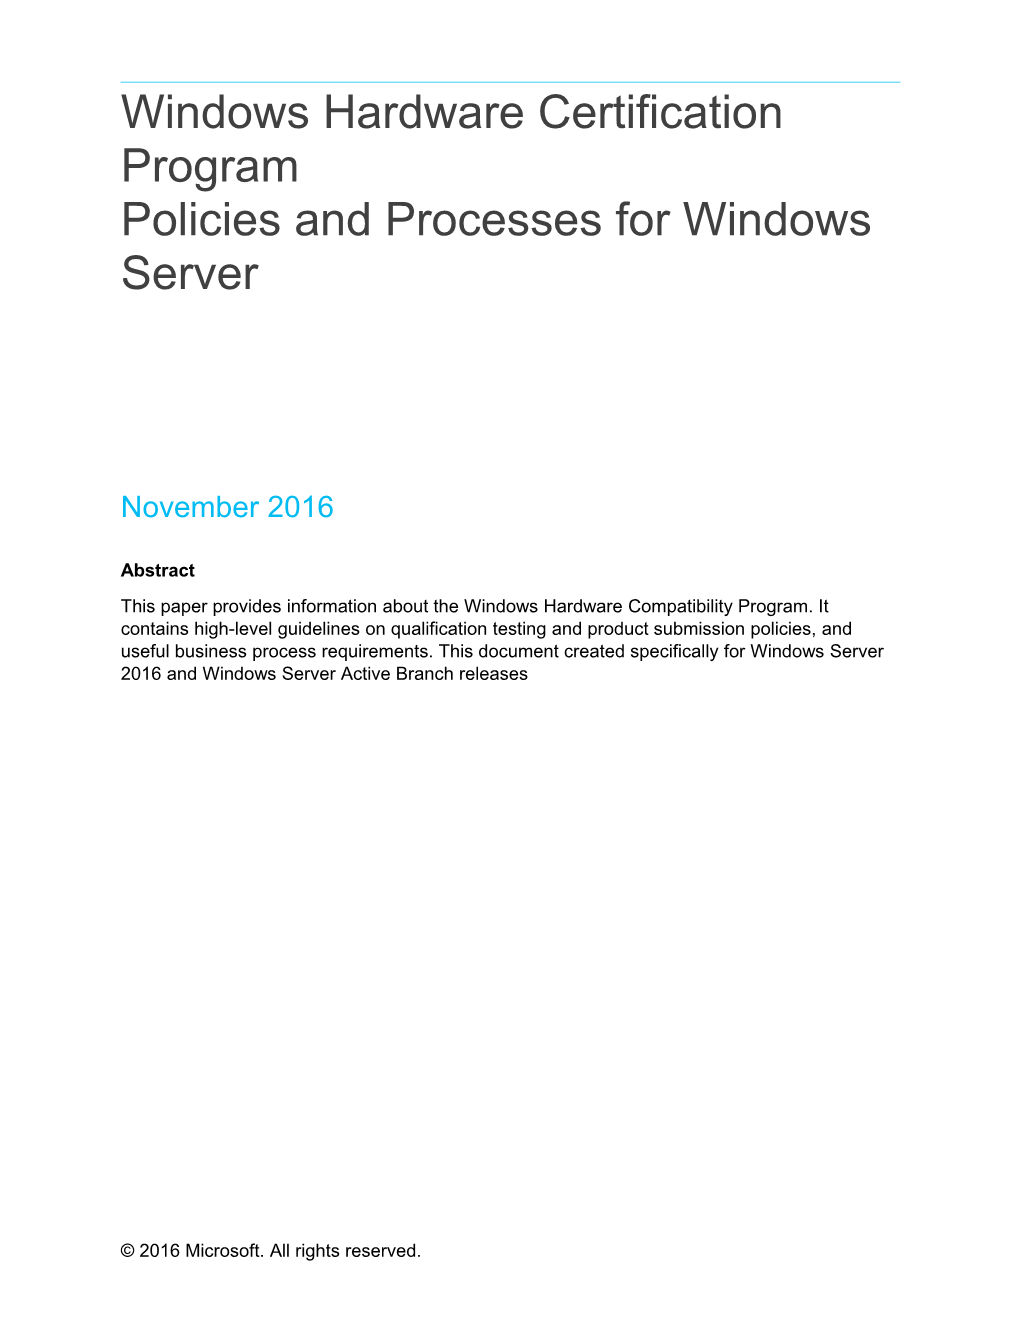 Windows Hardware Compatibility Program Policies and Processes